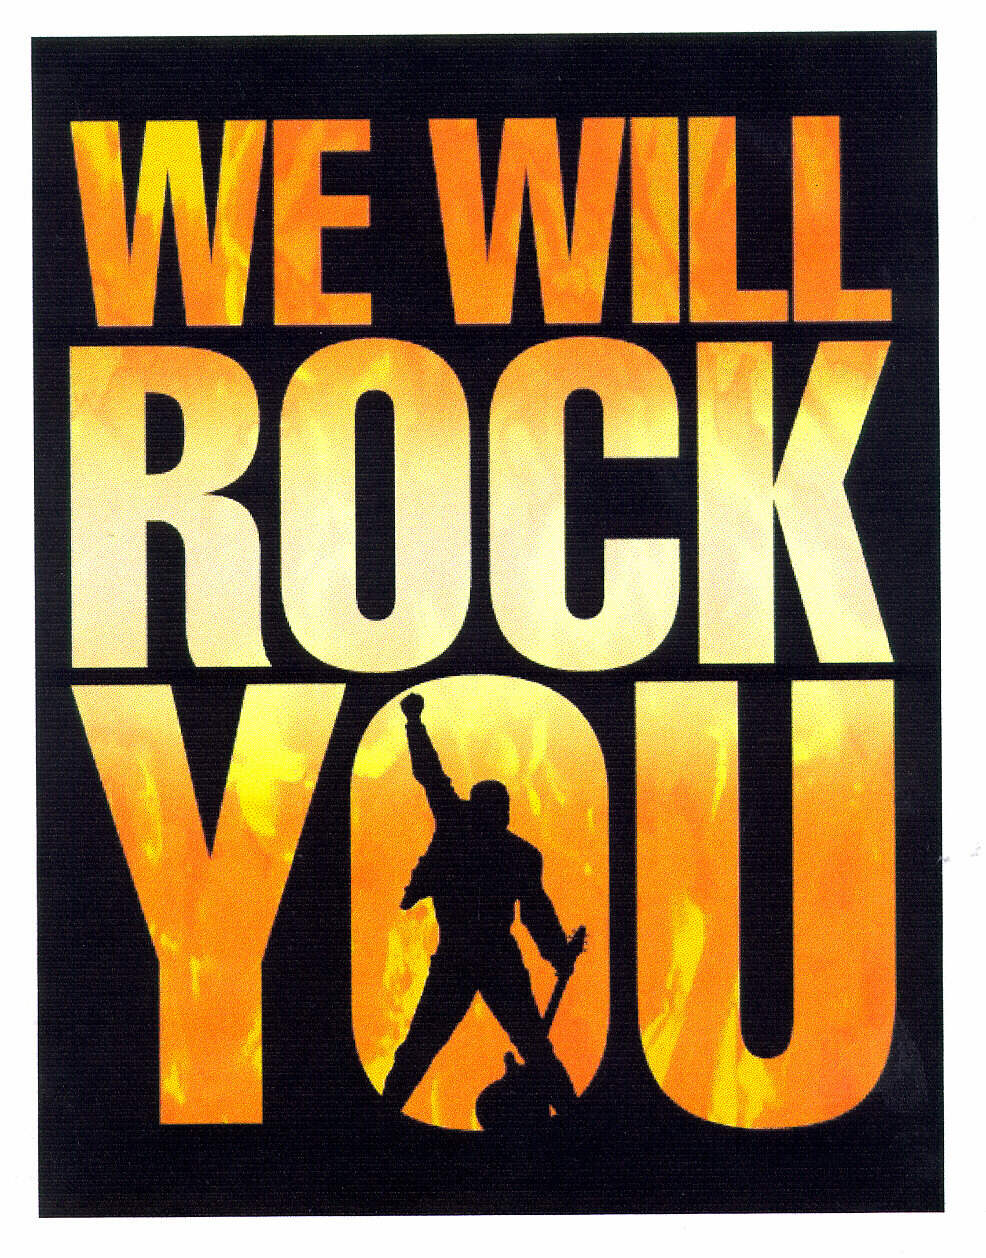 Trademark Information For We Will Rock You From Ctm   By Markify